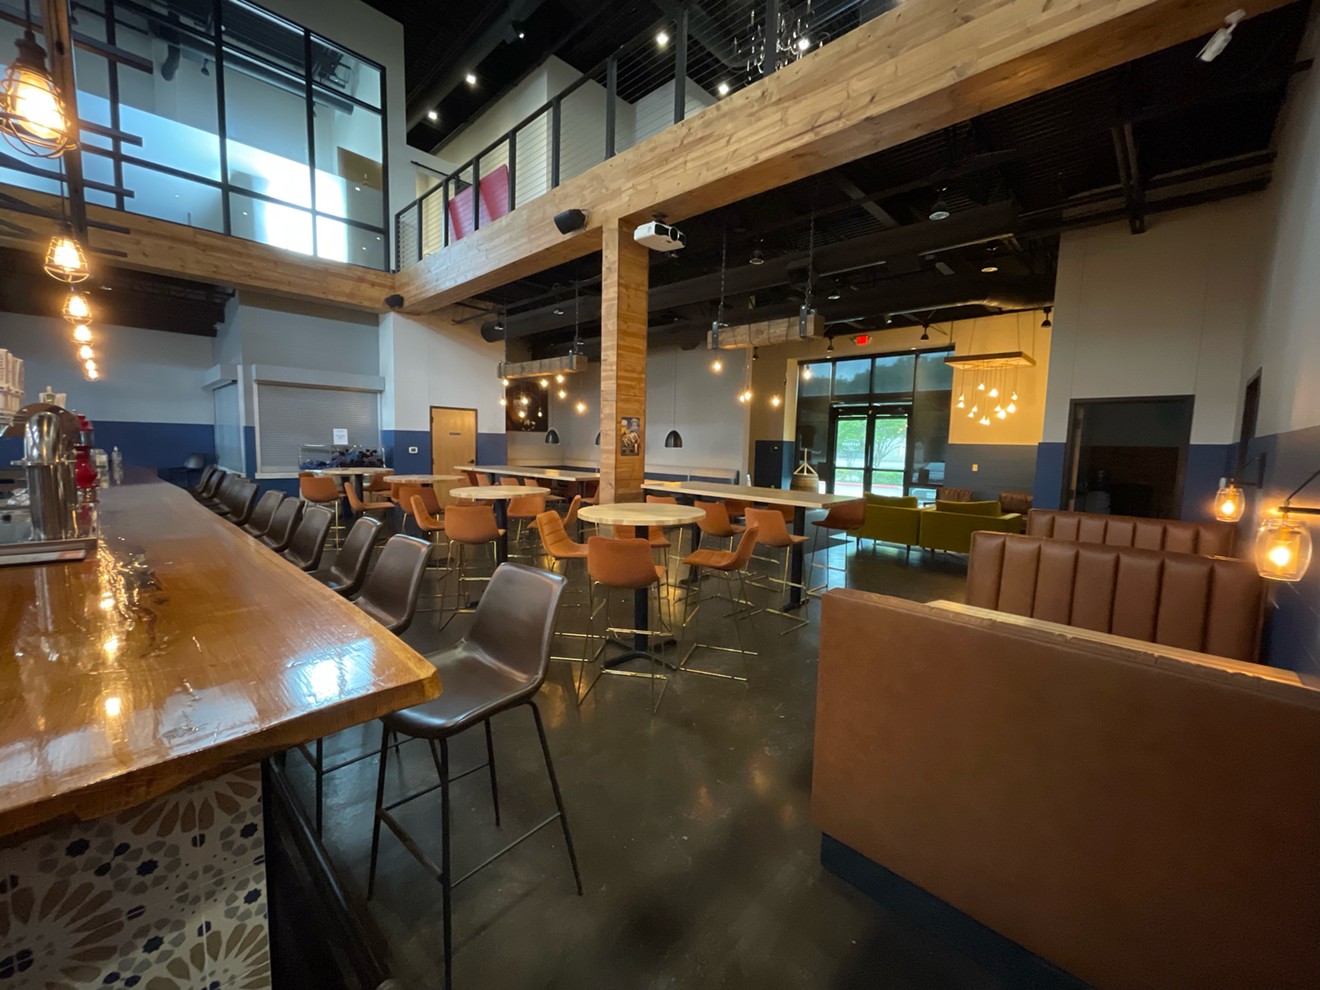 The new taproom at Lakewood Brewing is ready to be tried and tested.